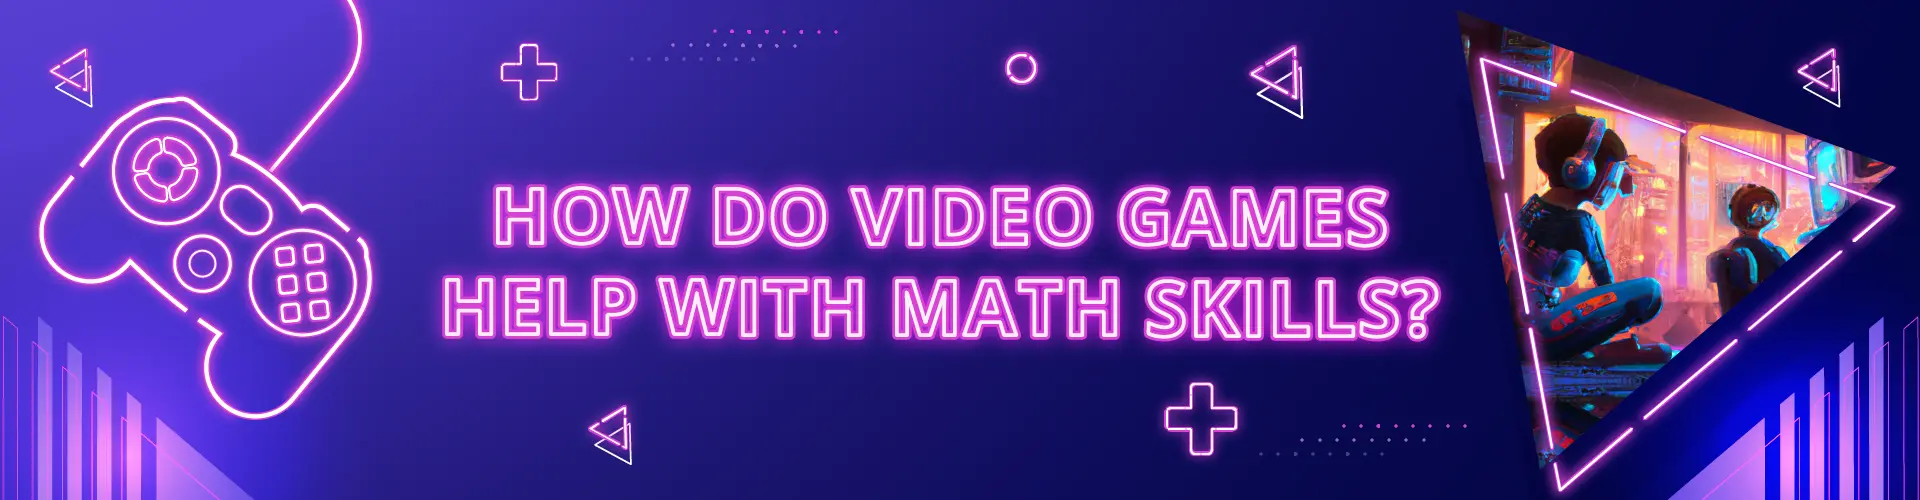 video games help with math skills?